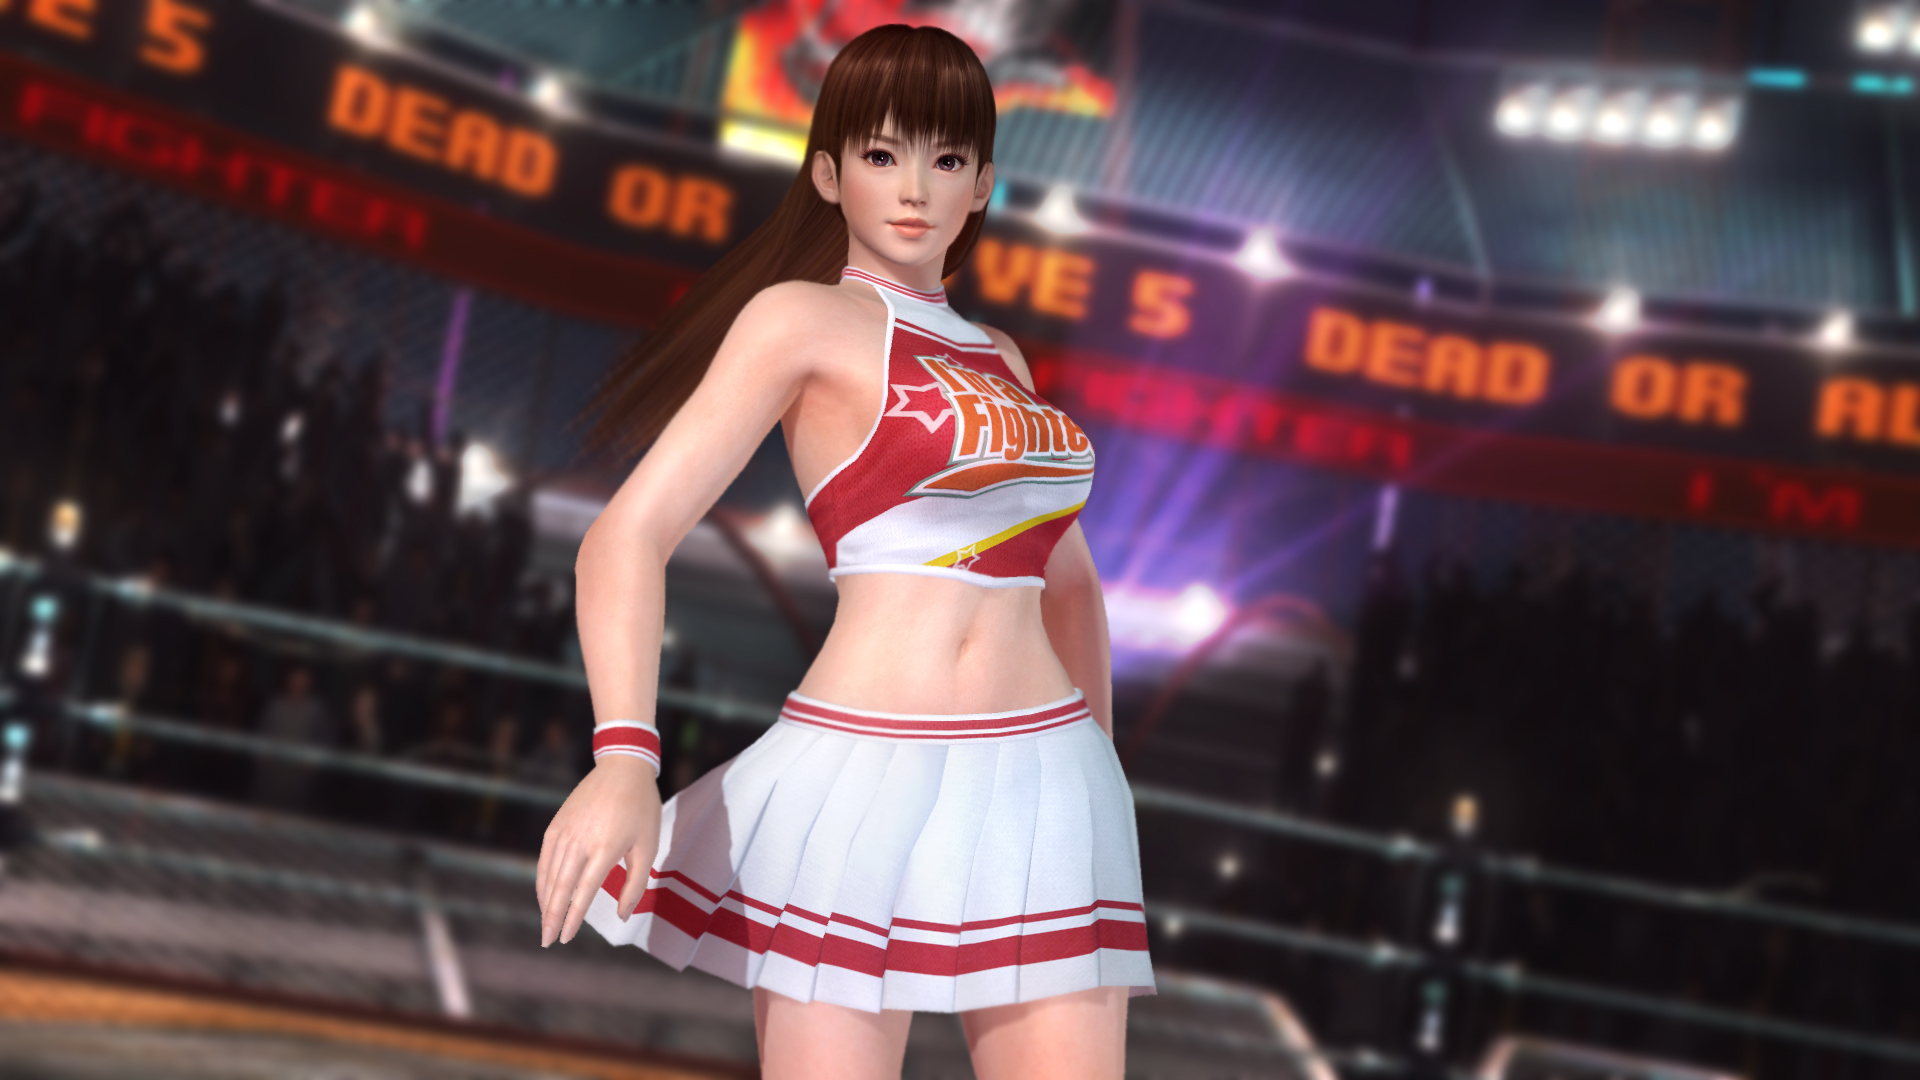 Image Doa5 Leifang Cheerleader Dead Or Alive Wiki Fandom Powered By Wikia 7269